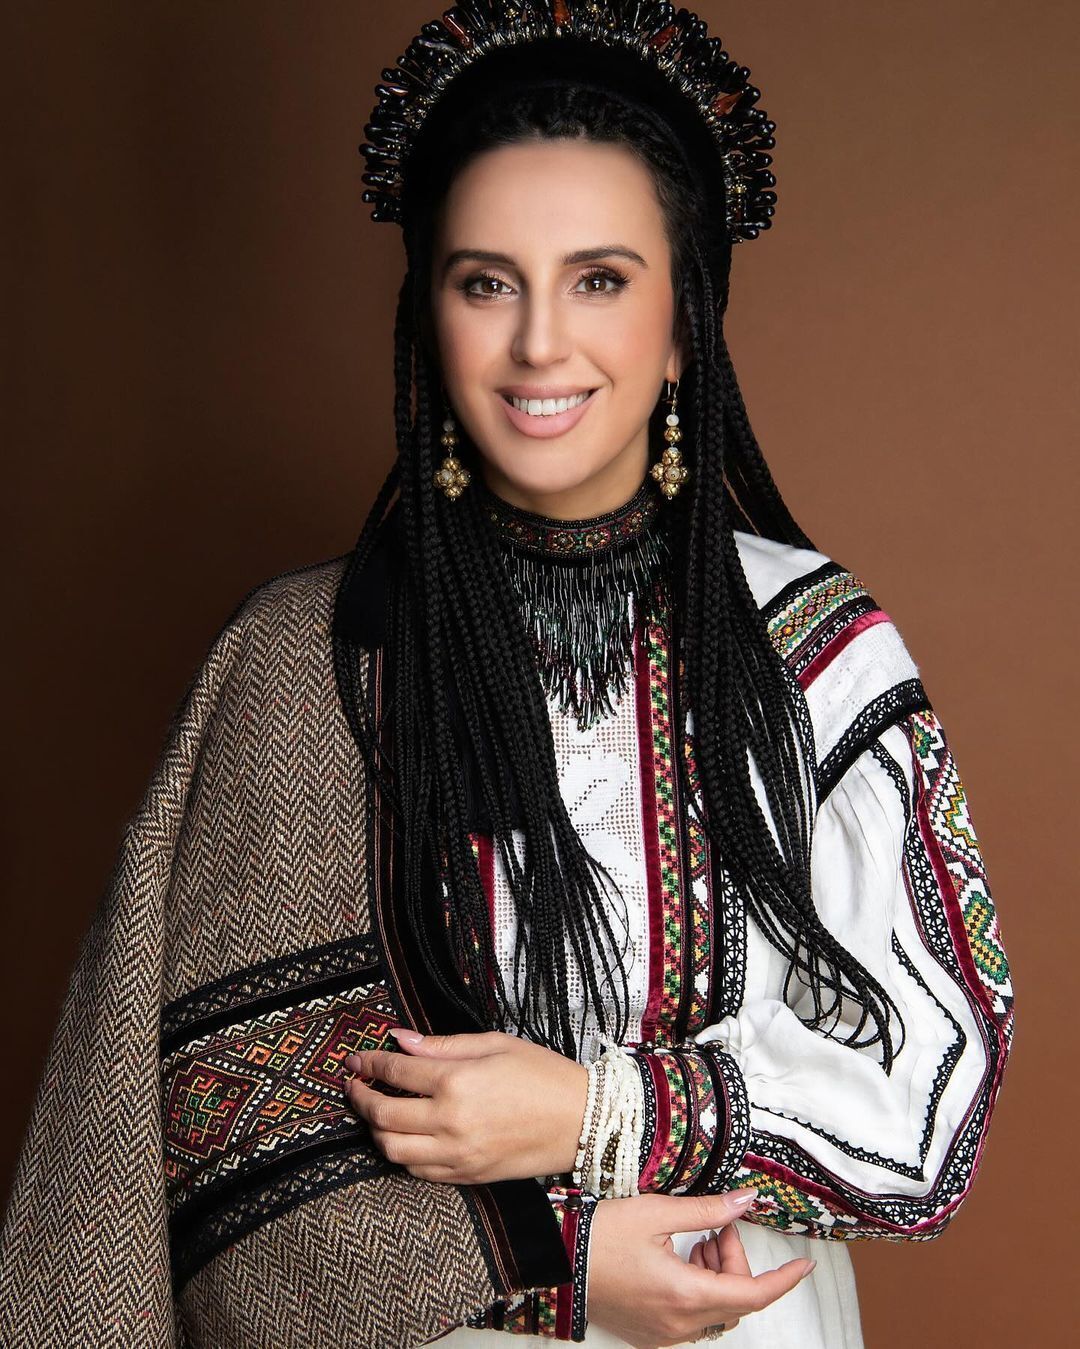 In Russia, a court issued an arrest in absentia for Jamala: the Ukrainian singer faces up to 10 years